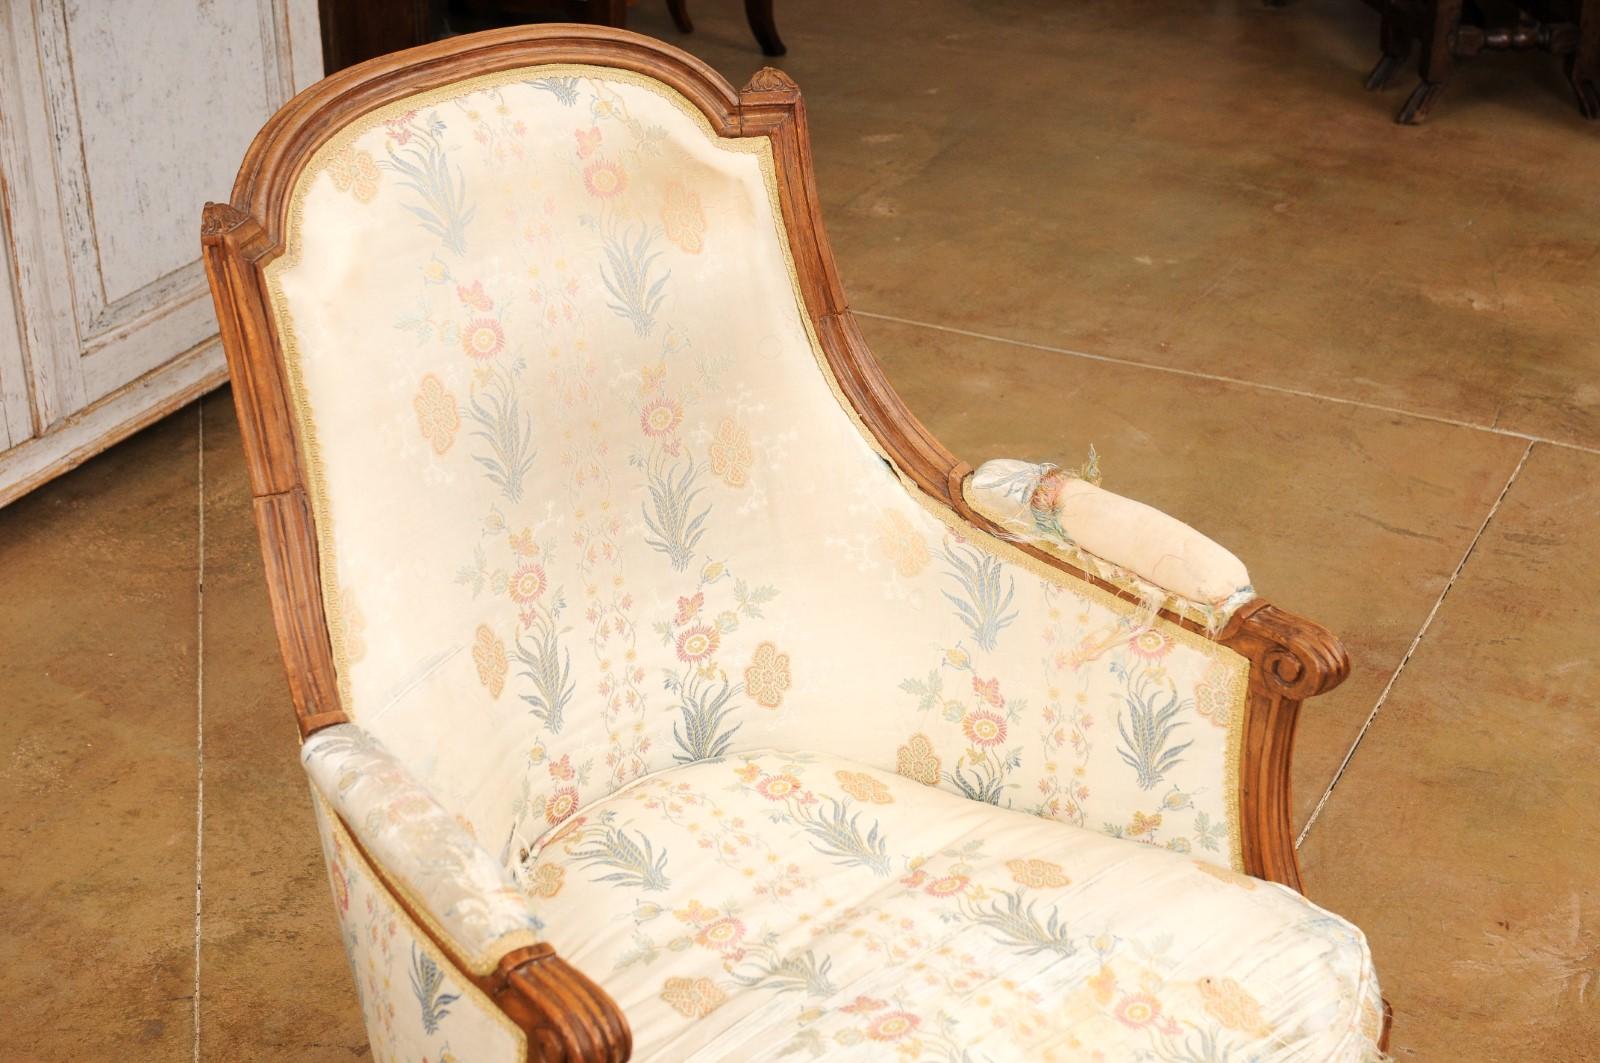 Upholstery French Louis XVI Period Late 18th Century Walnut Bergère Chair with Curving Back For Sale